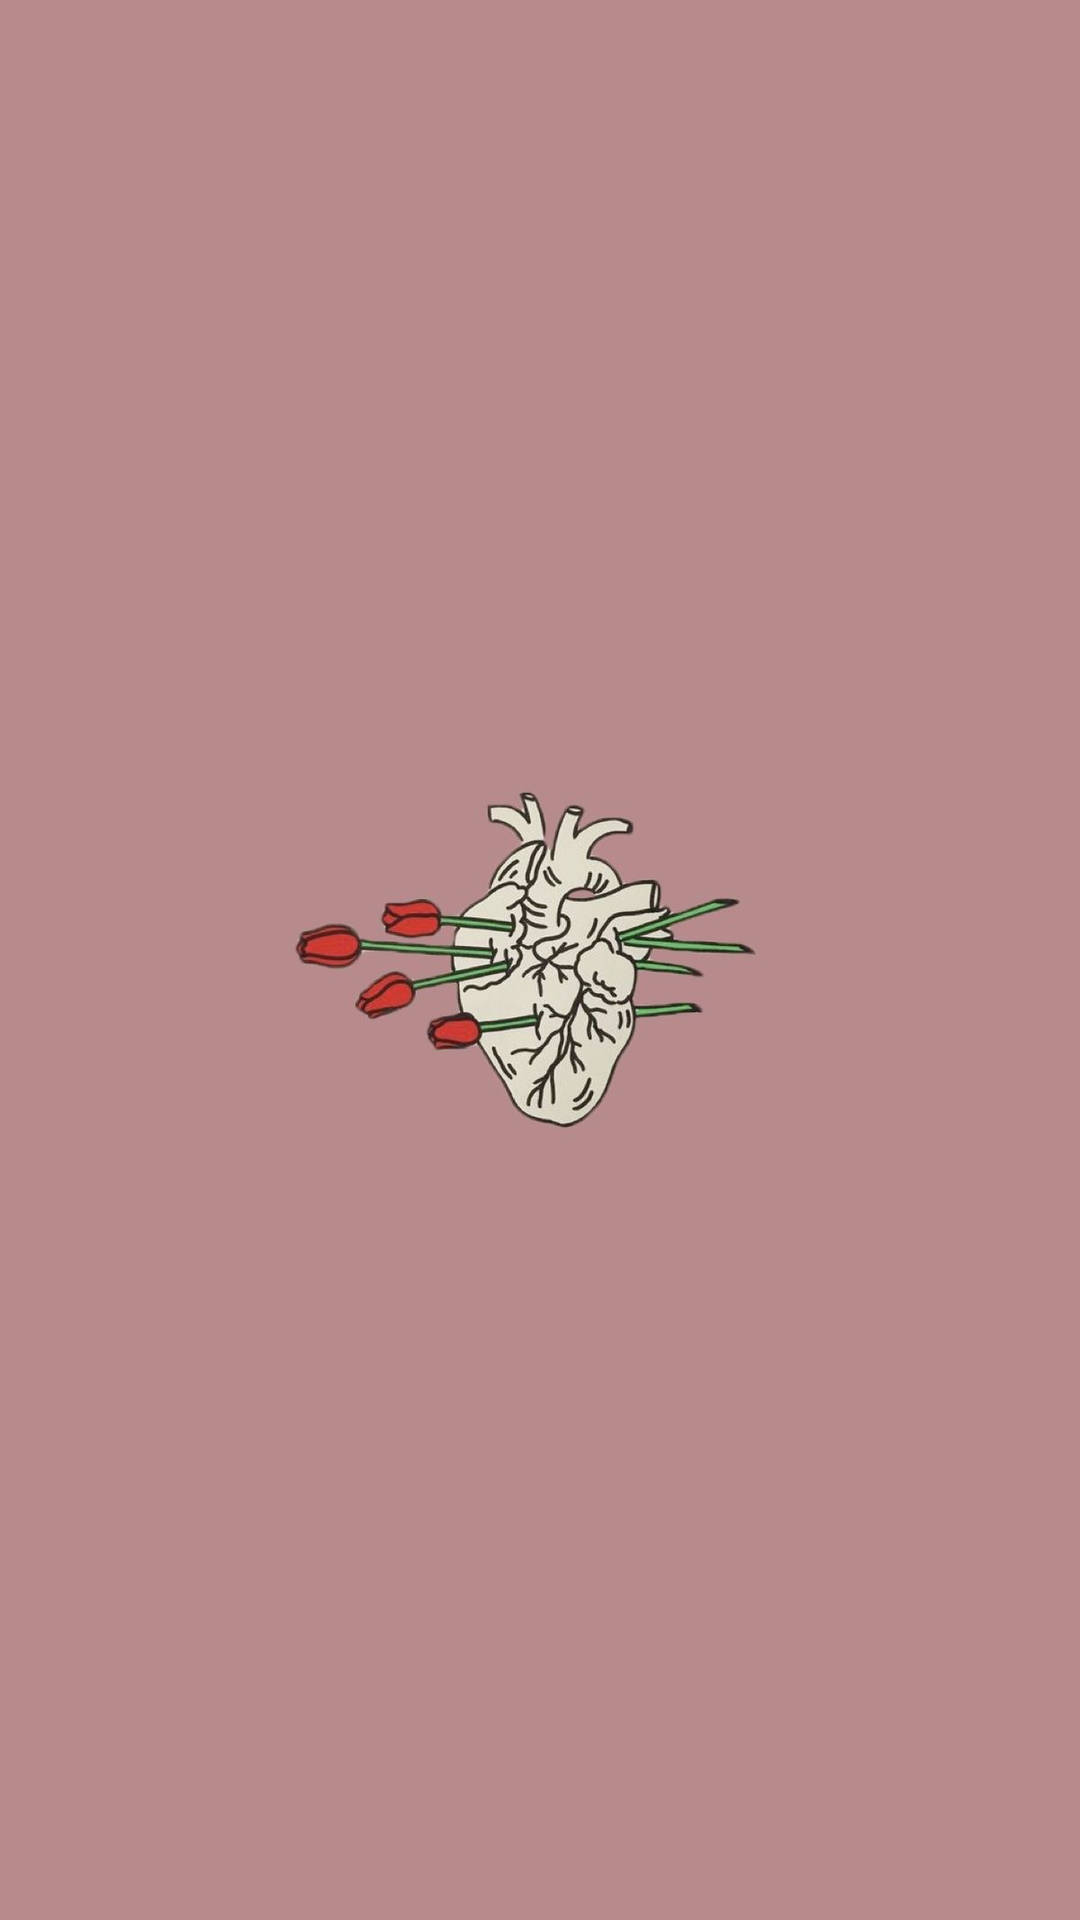 Aesthetic Heart With Red Roses Wallpaper